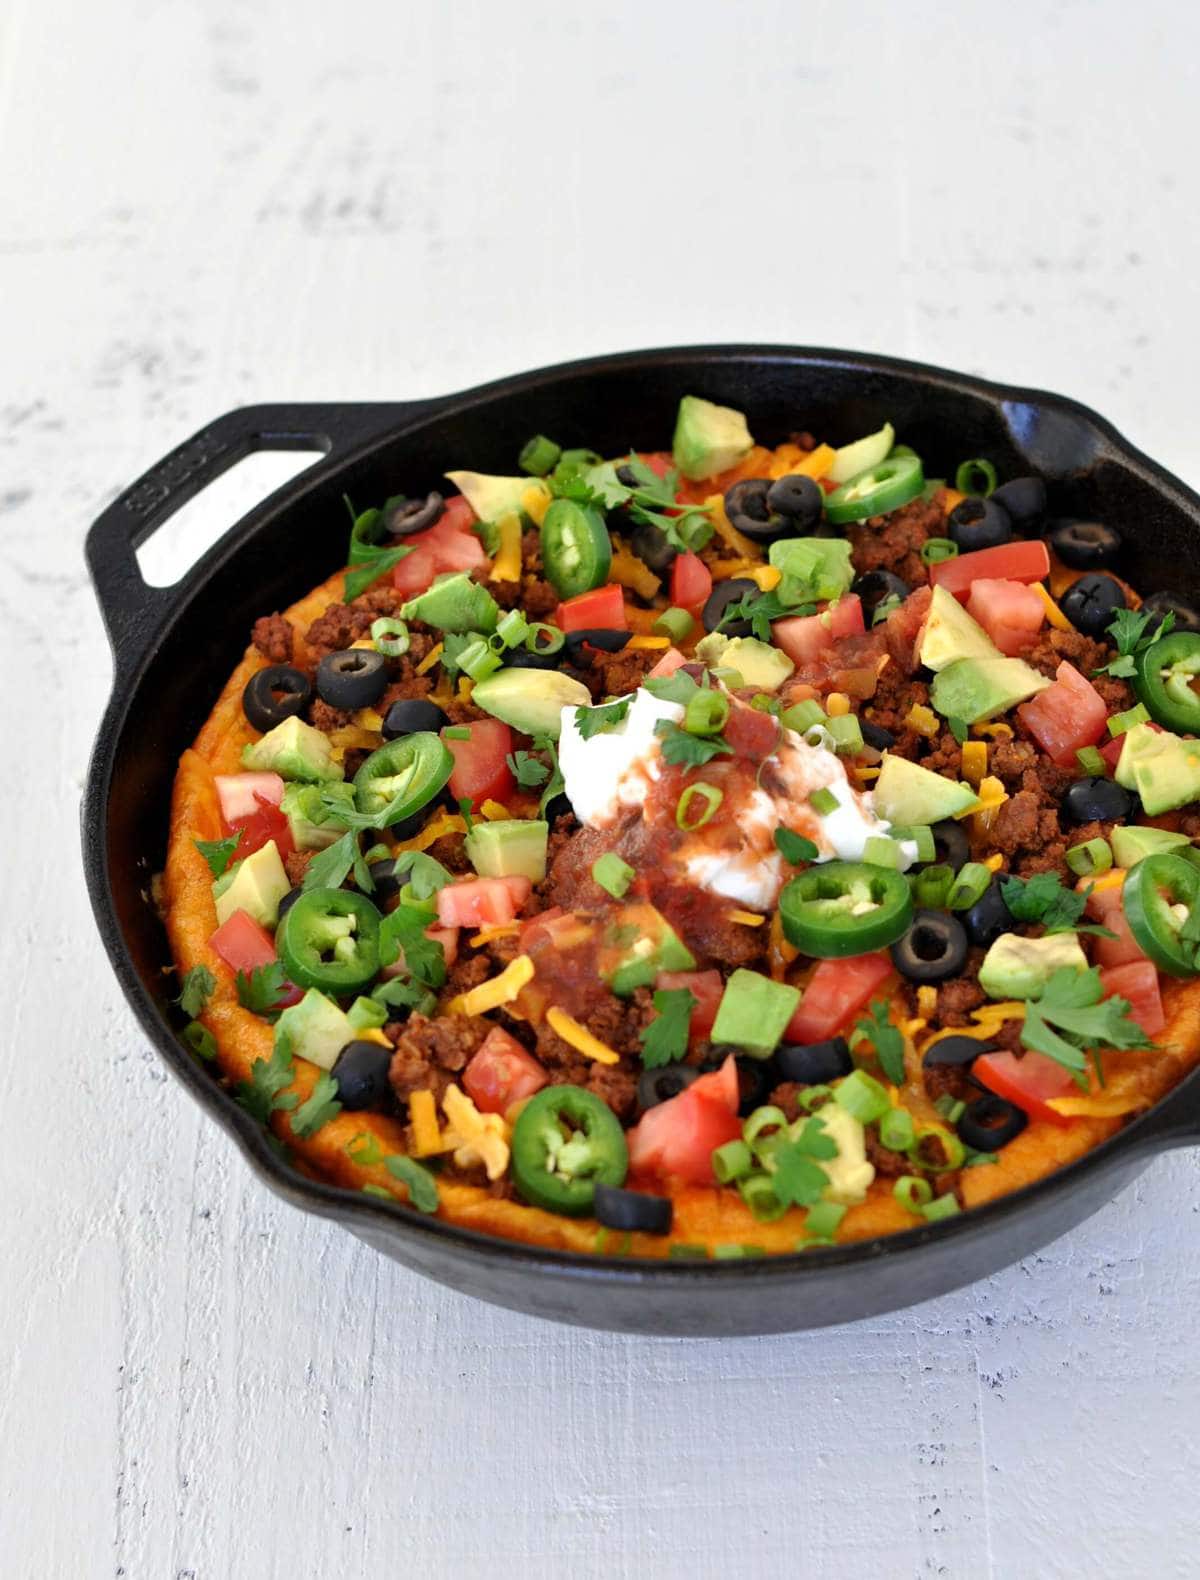 a cast iron skillet with a breakfast bake in it. Ingredients - eggs, beef, cheese, salsa, sour cream, avocado, olives.